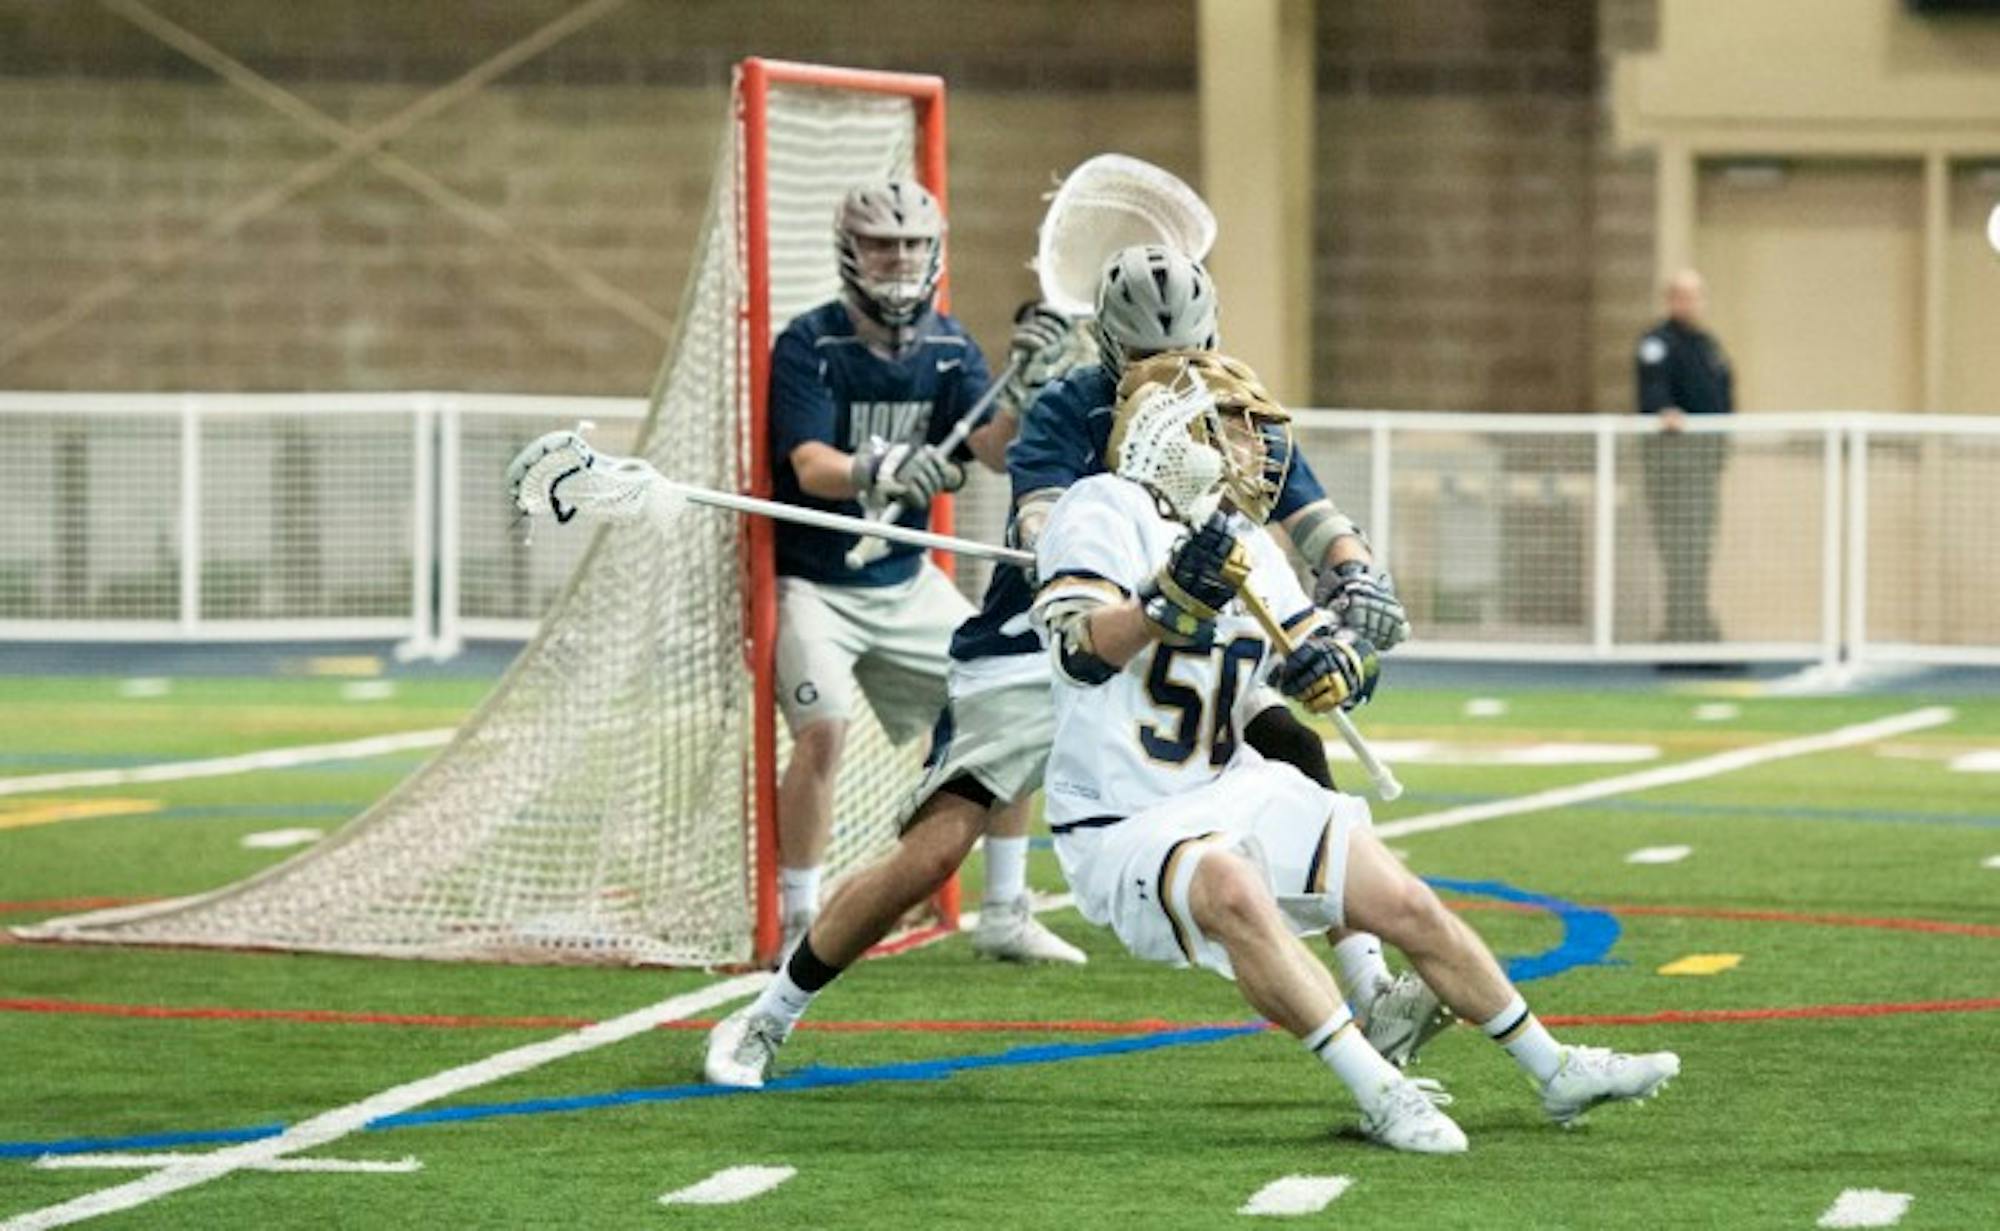 Irish sophomore attack Matt Kavanagh cuts back against a defender during Notre Dame’s 14-12 win over Georgetown on Saturday.